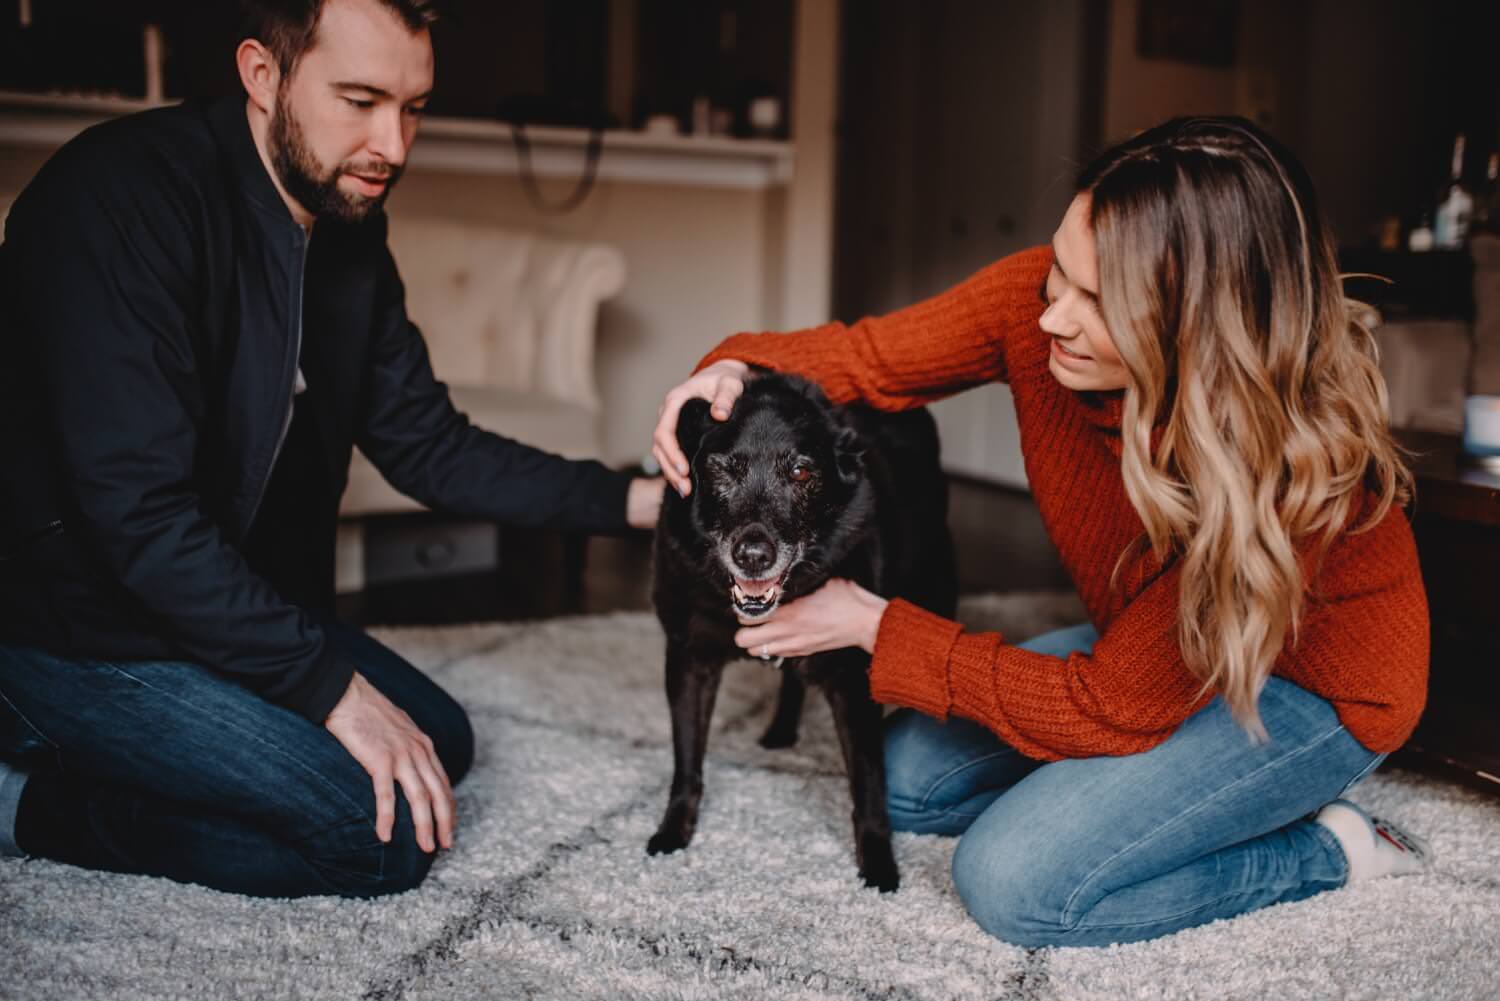 Downtown Chicago Engagement photos with a dog